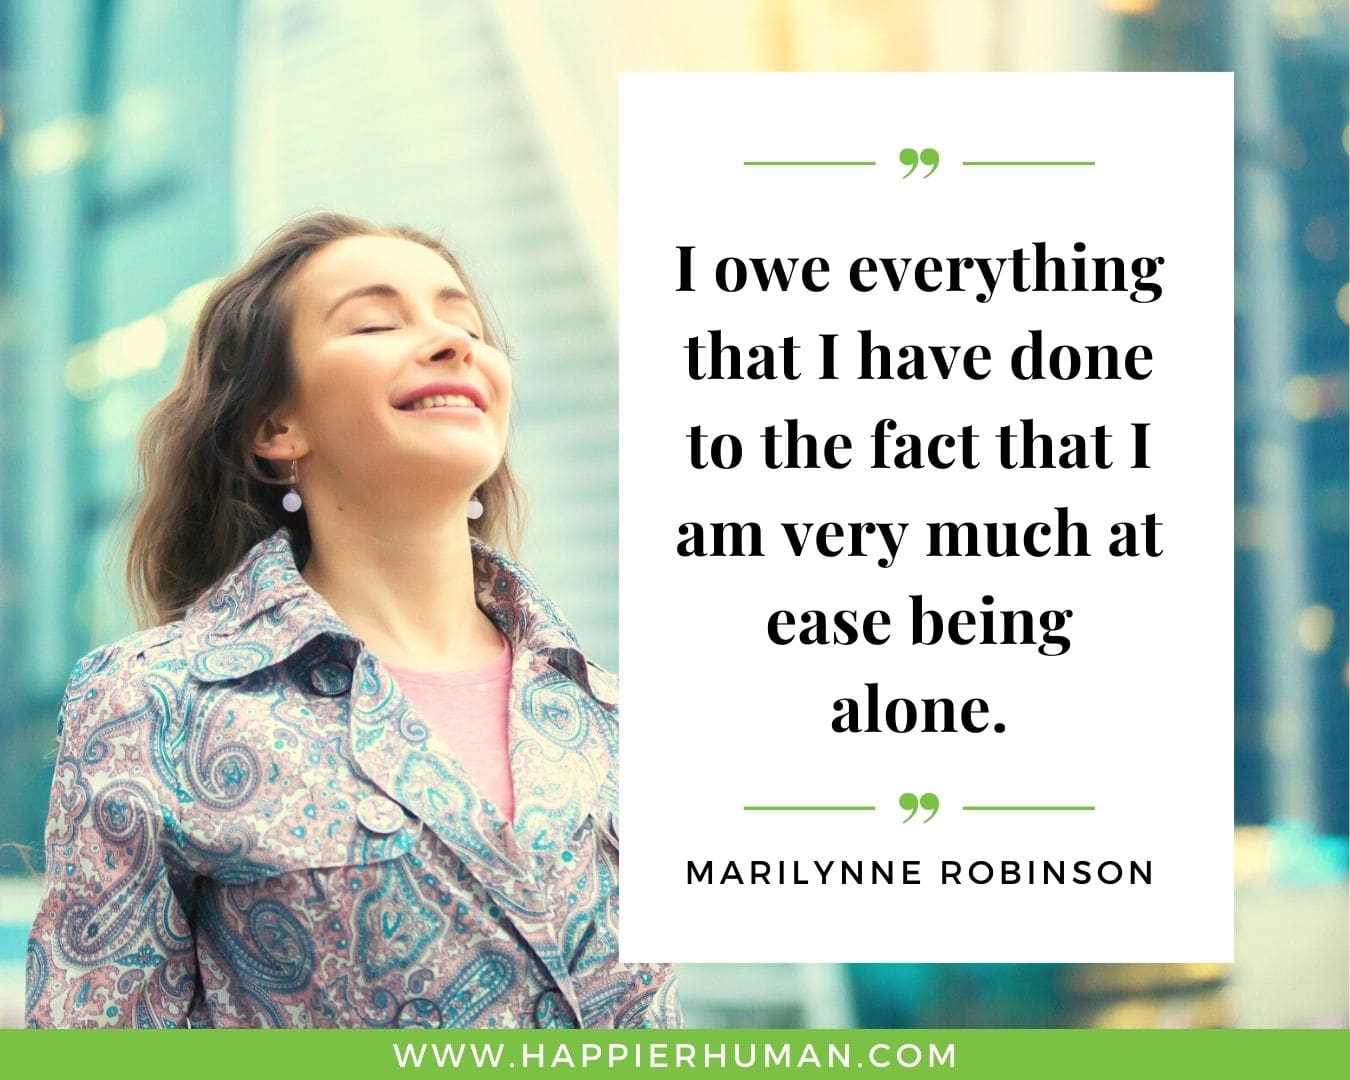 Introvert Quotes - “I owe everything that I have done to the fact that I am very much at ease being alone.” – Marilynne Robinson